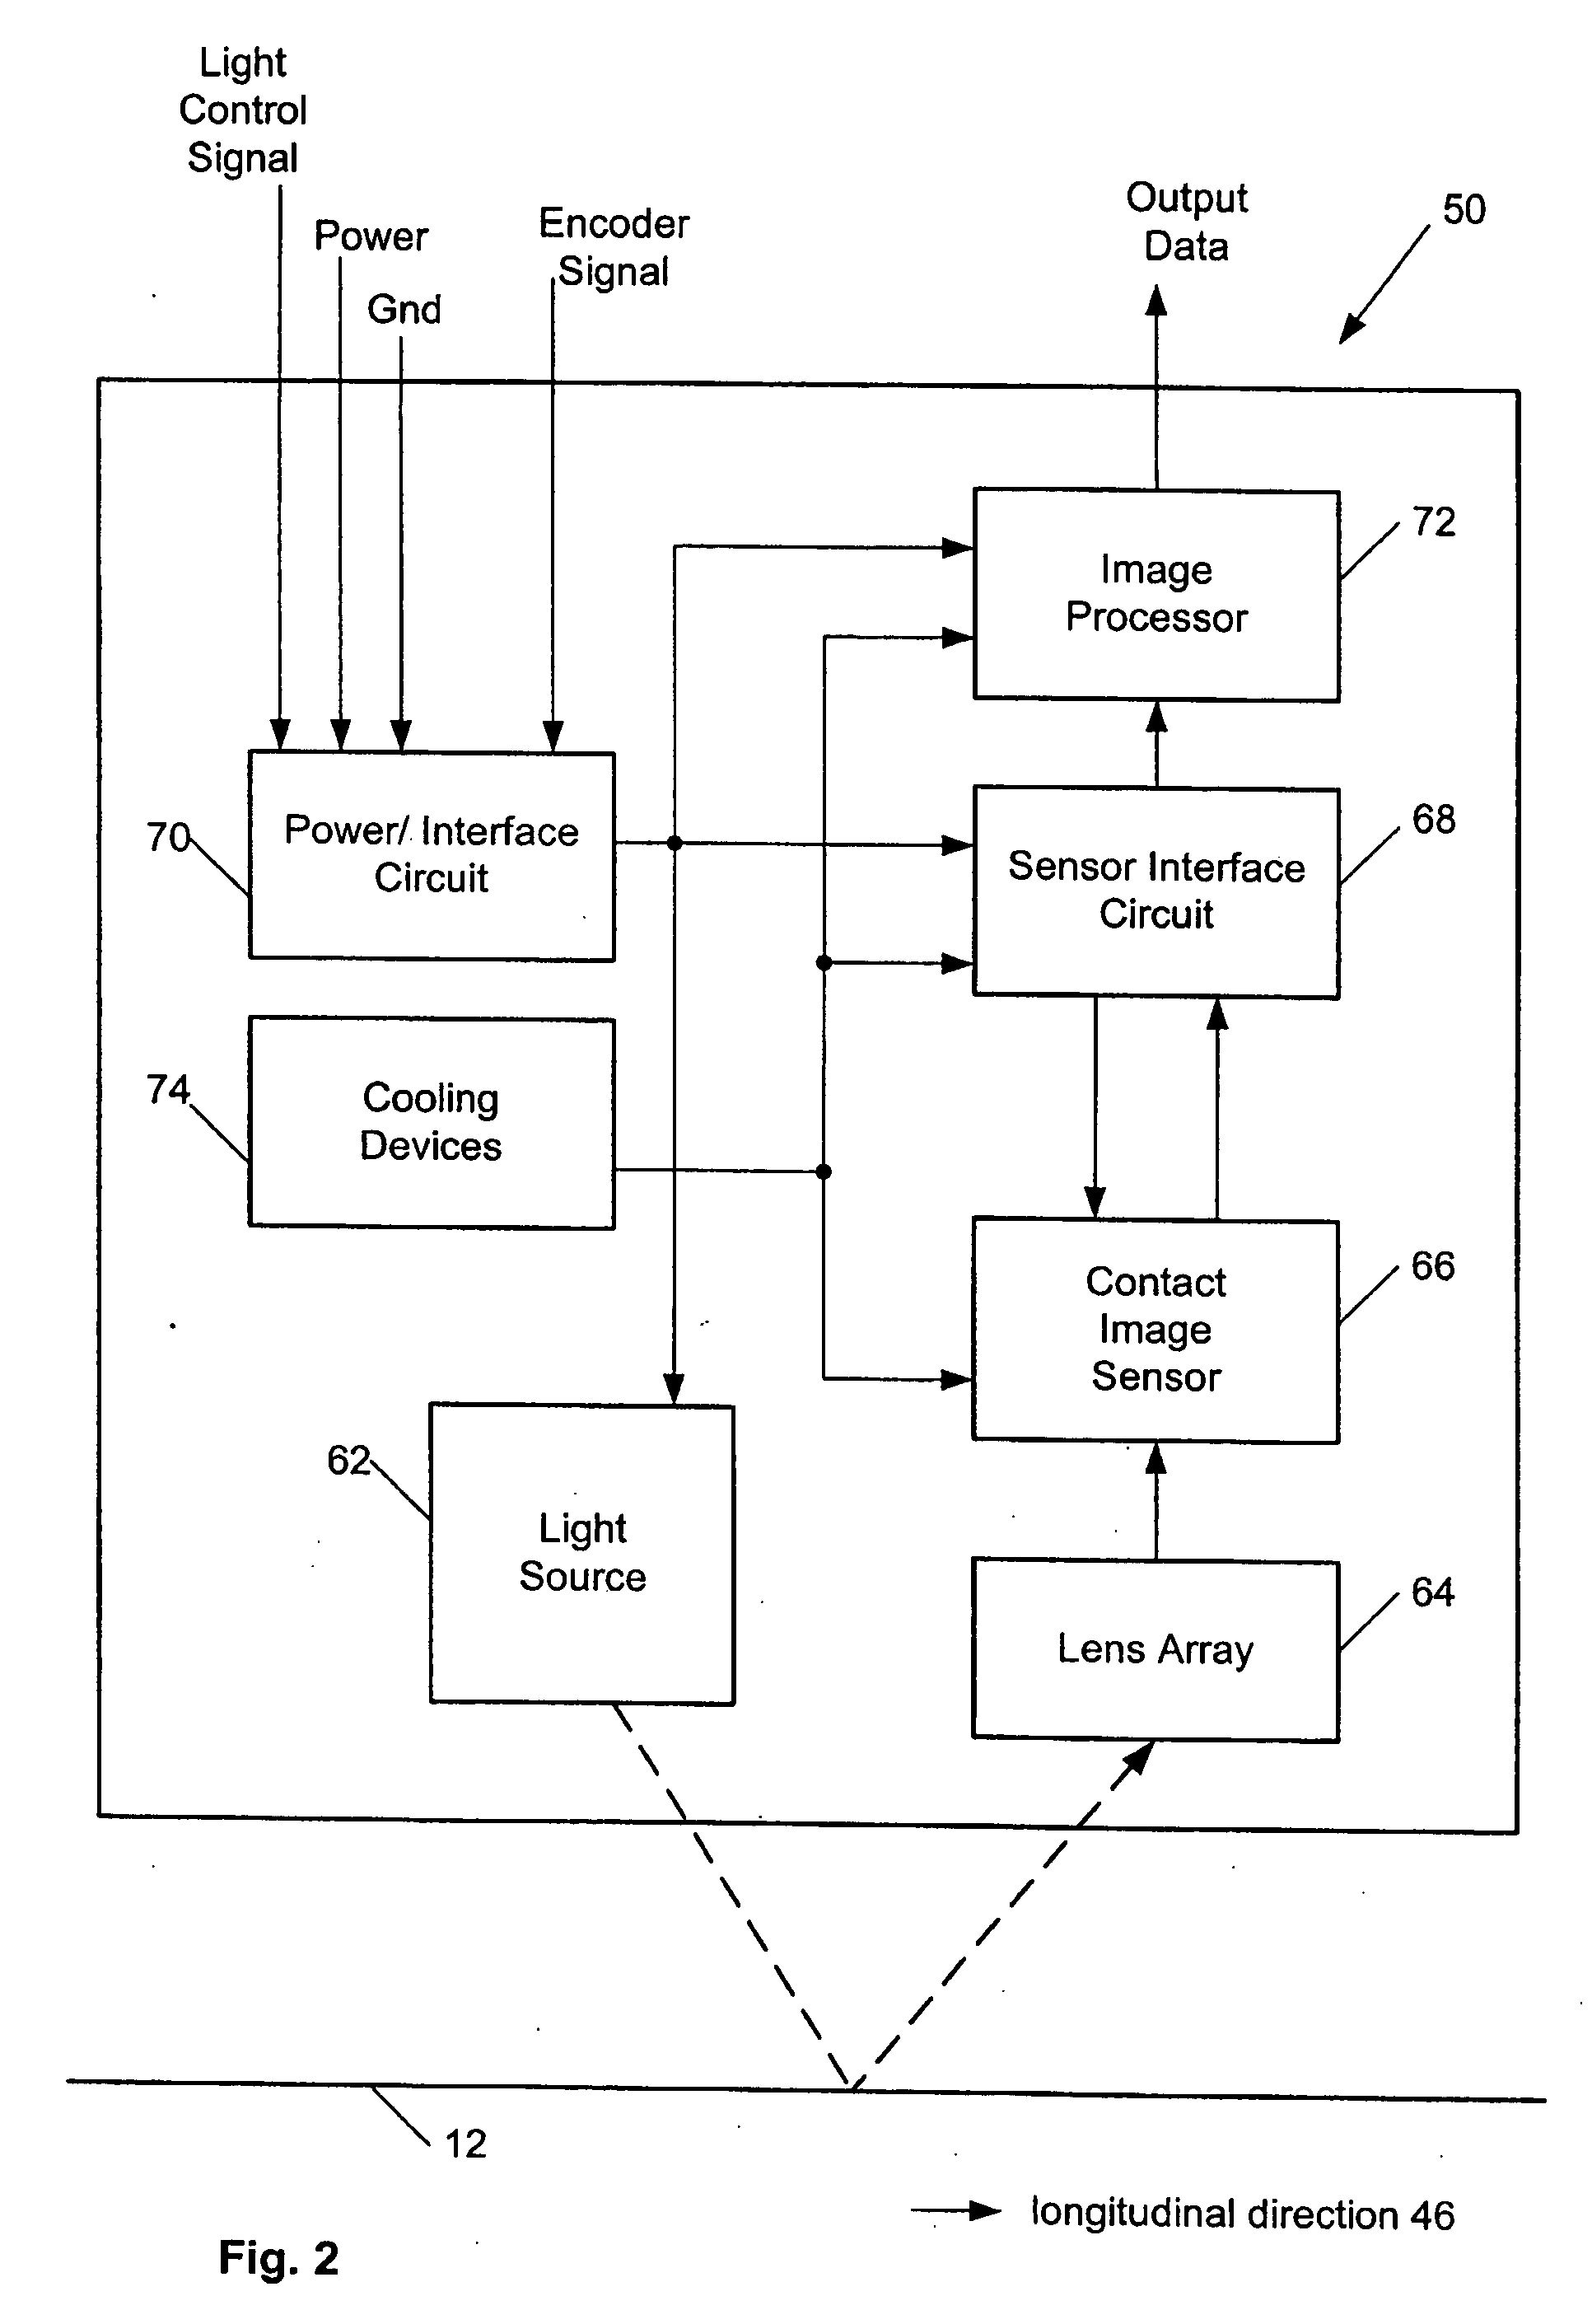 Web inspection module including contact image sensors